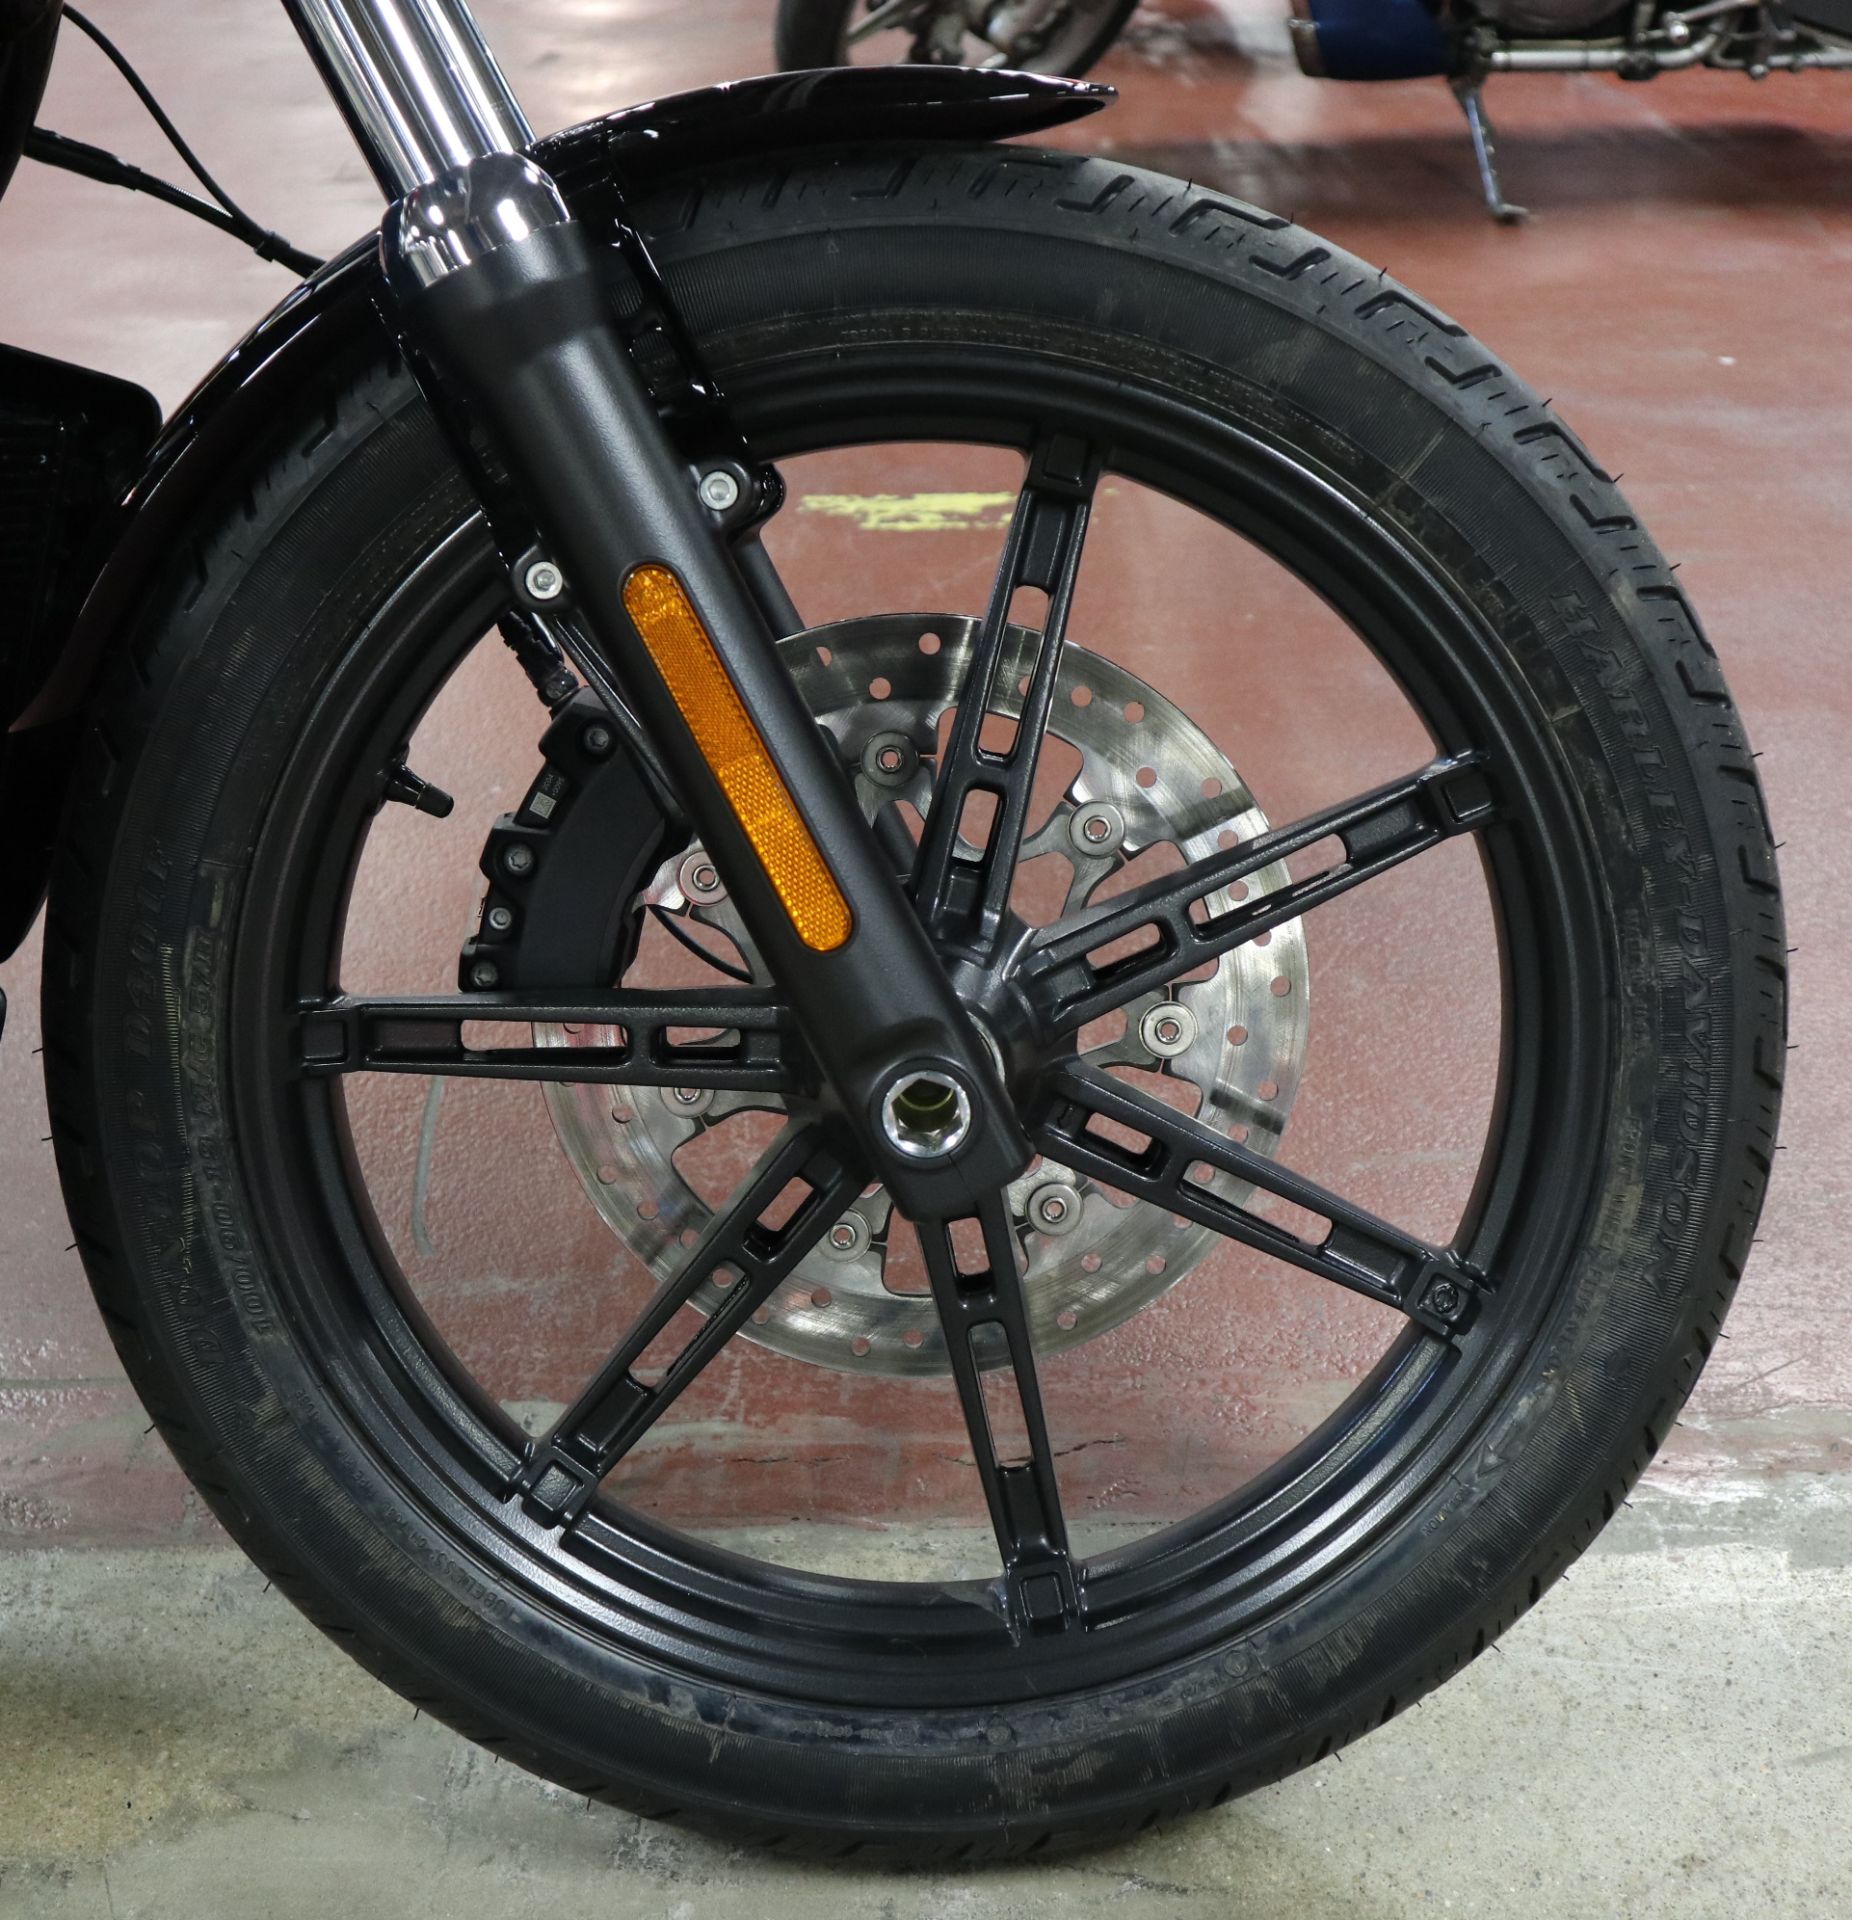 2022 Harley-Davidson Nightster™ in New London, Connecticut - Photo 13